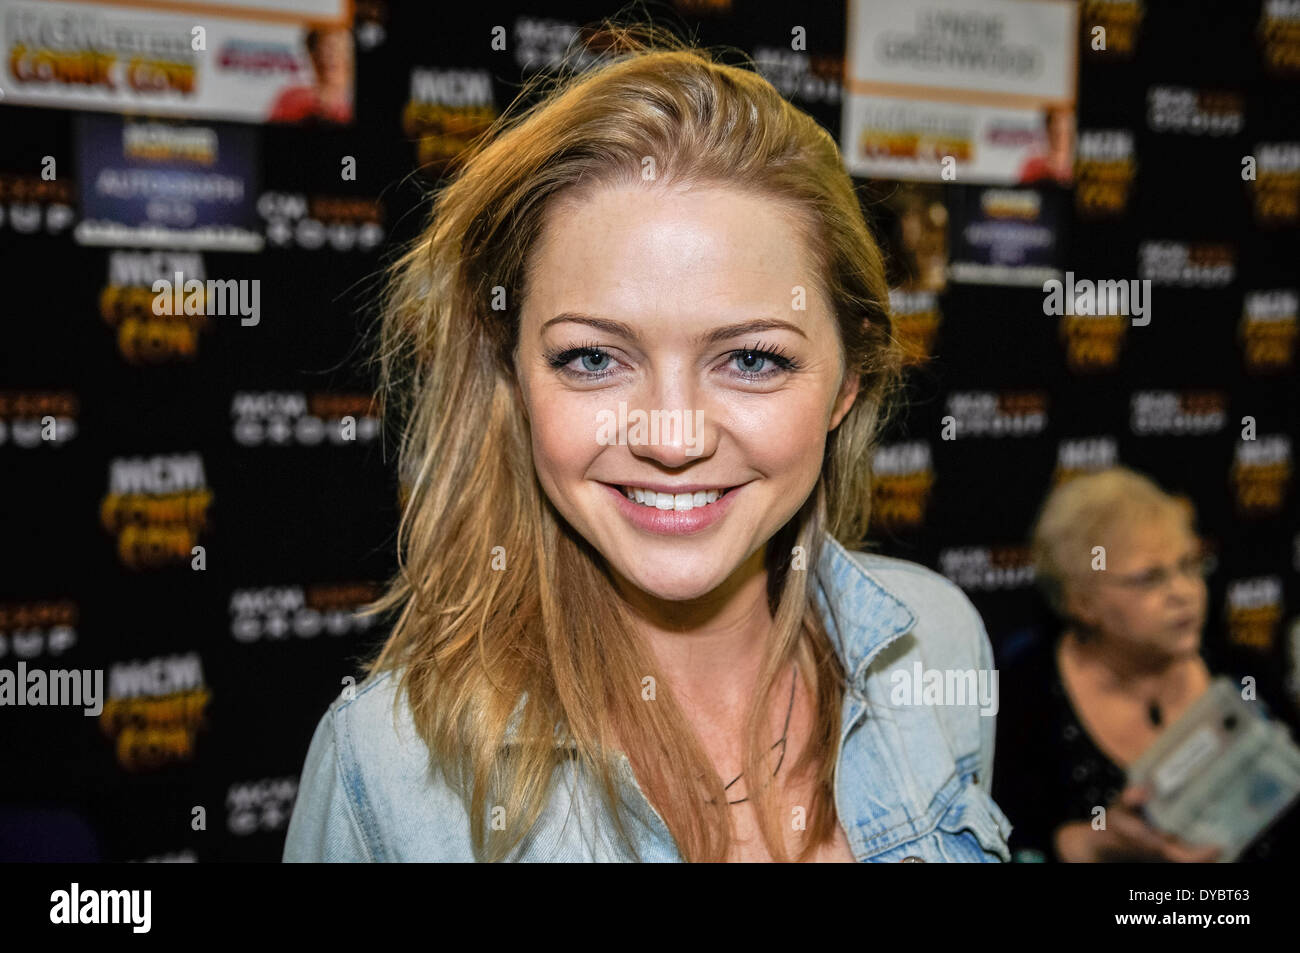 Dublin, Ireland. 13 Apr 2014 - Hannah Spearritt, former member of S-Club 7, and actress playing the role of Abby Maitland in the drama Primeval, at MCM Comic Con Credit:  Stephen Barnes/Alamy Live News Stock Photo